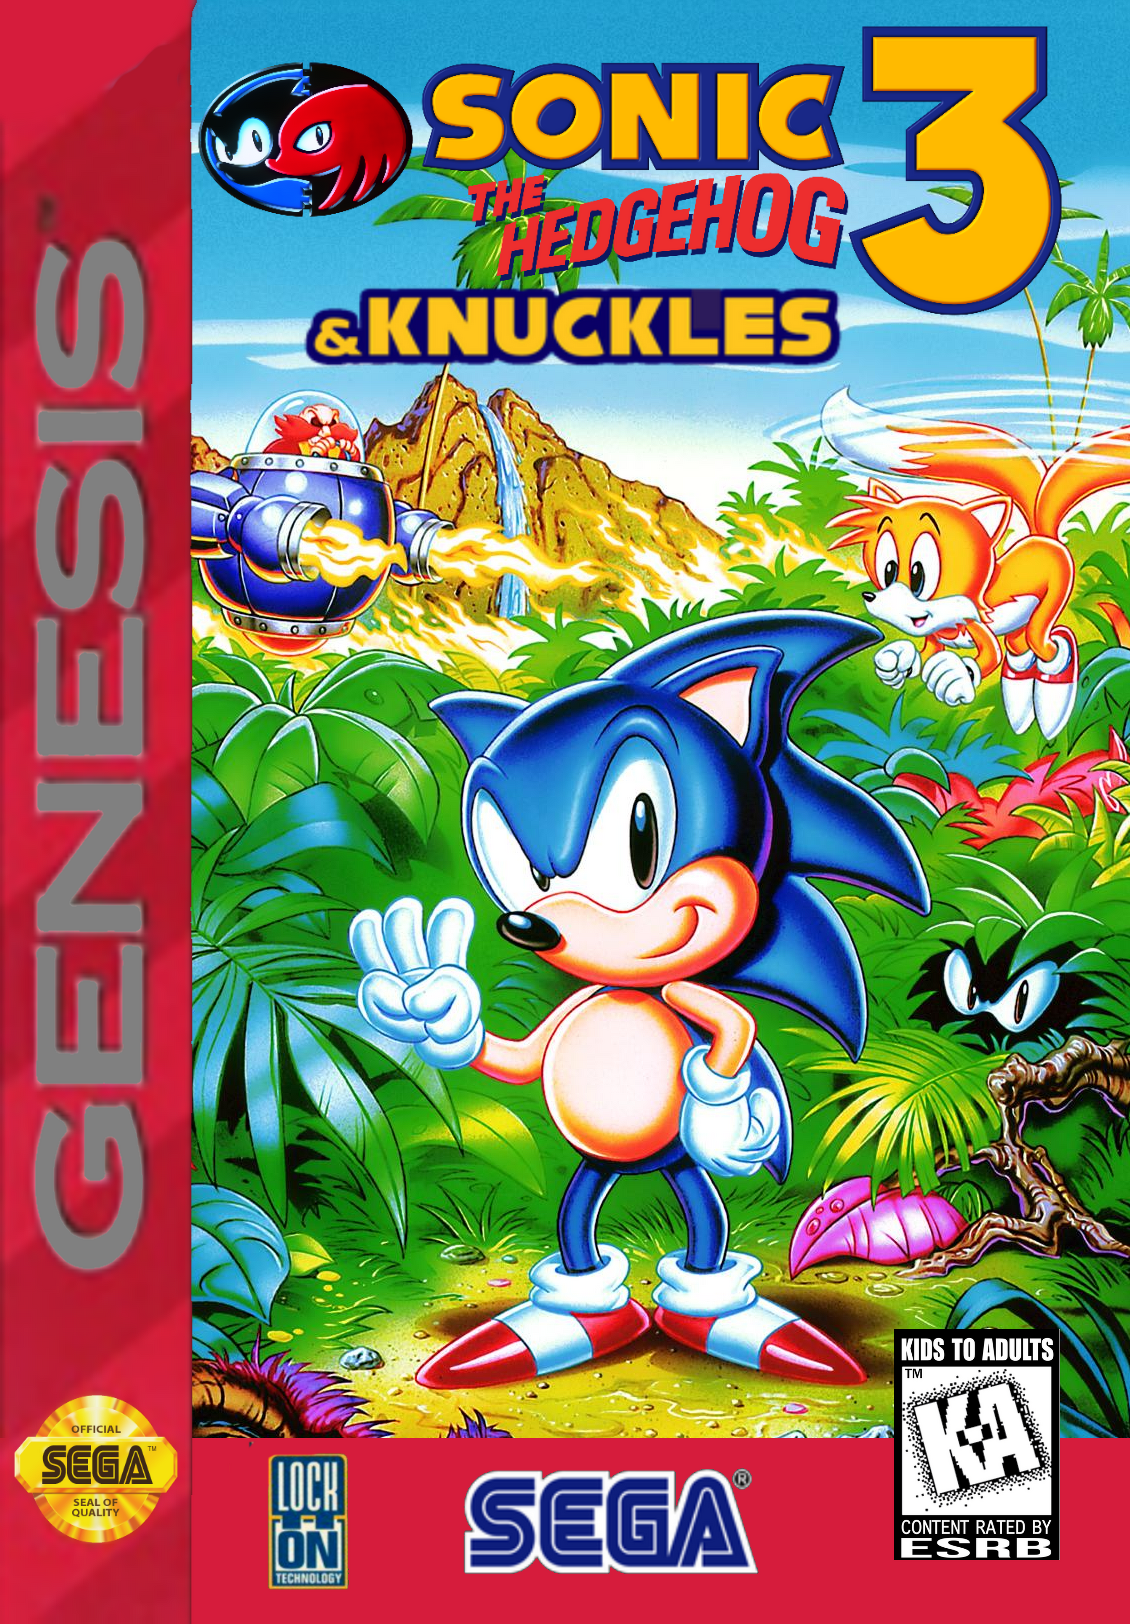 Game Corner [Sonic 3's Day]: Sonic 3 & Knuckles (Xbox One) – Dr. K's  Waiting Room